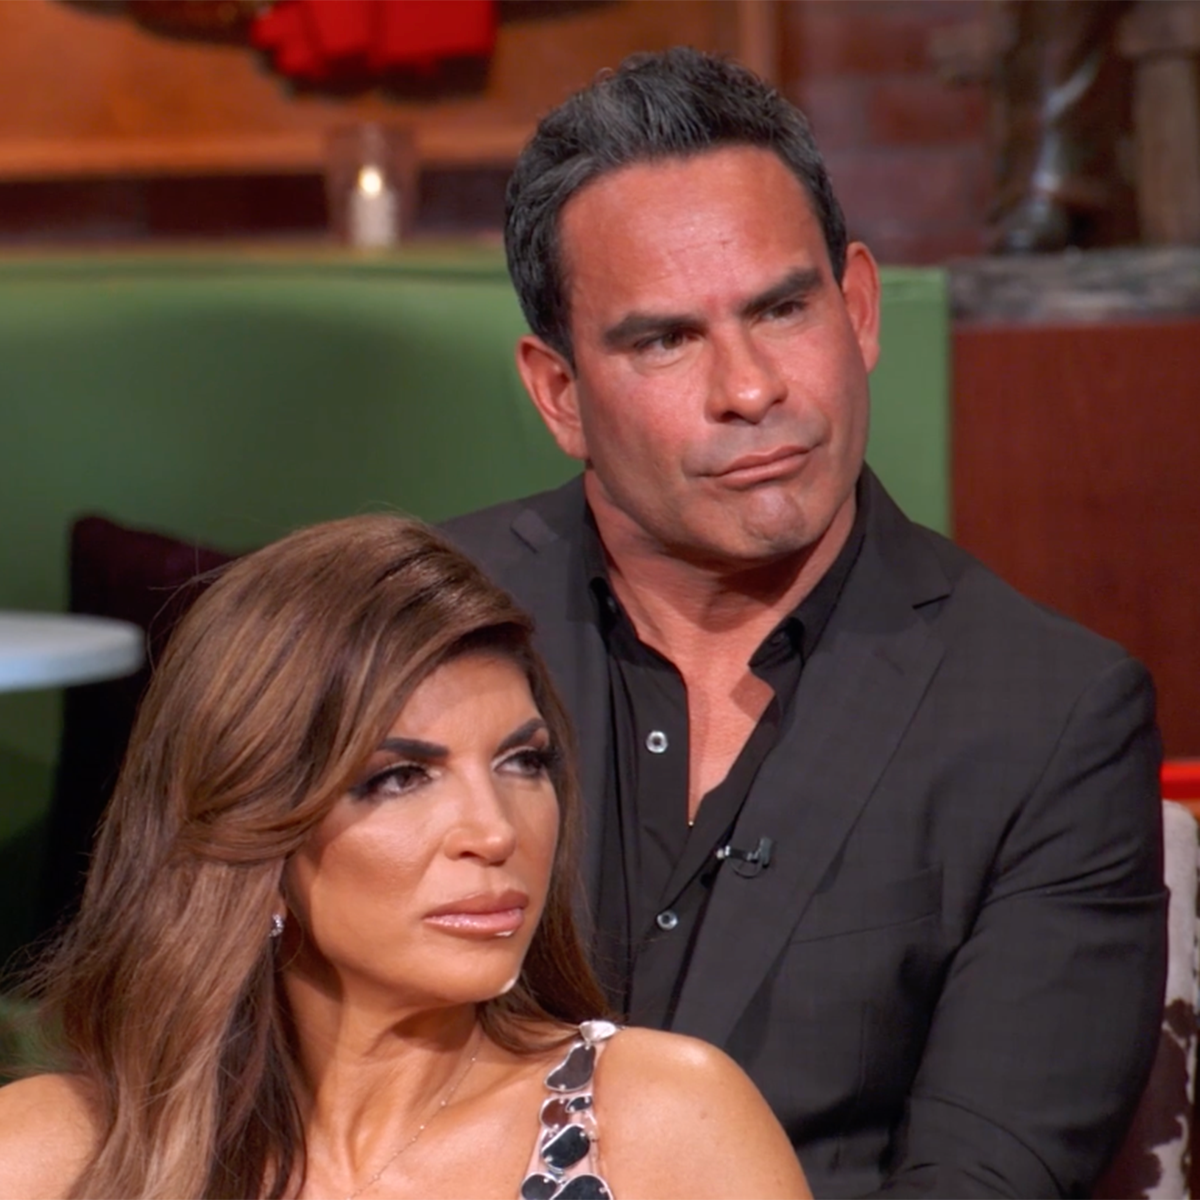 Teresa Giudices Fiancé Luis Ruelas Speaks Out on Abuse Allegations